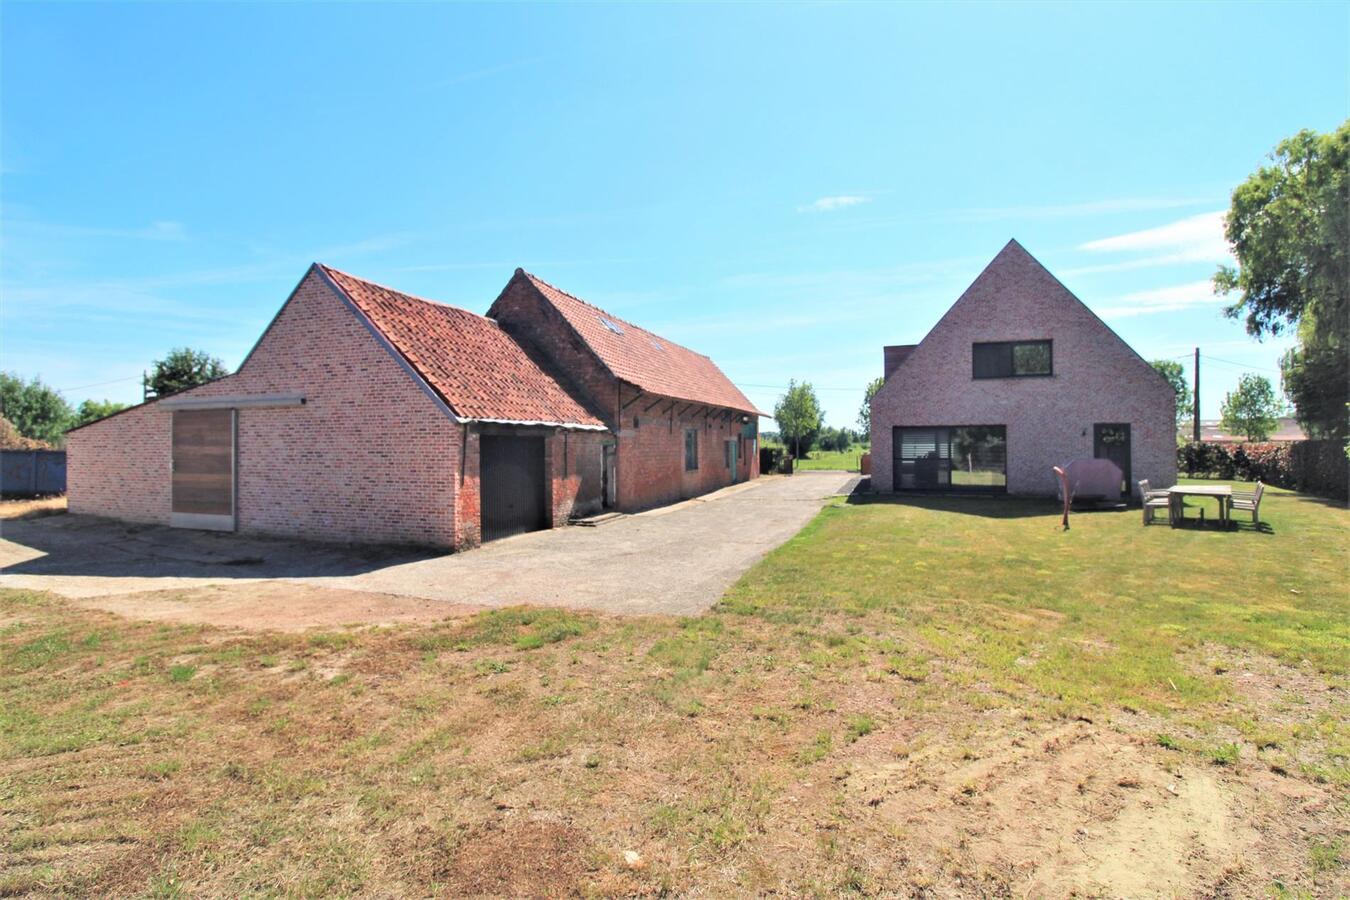 Property sold in Waasmunster